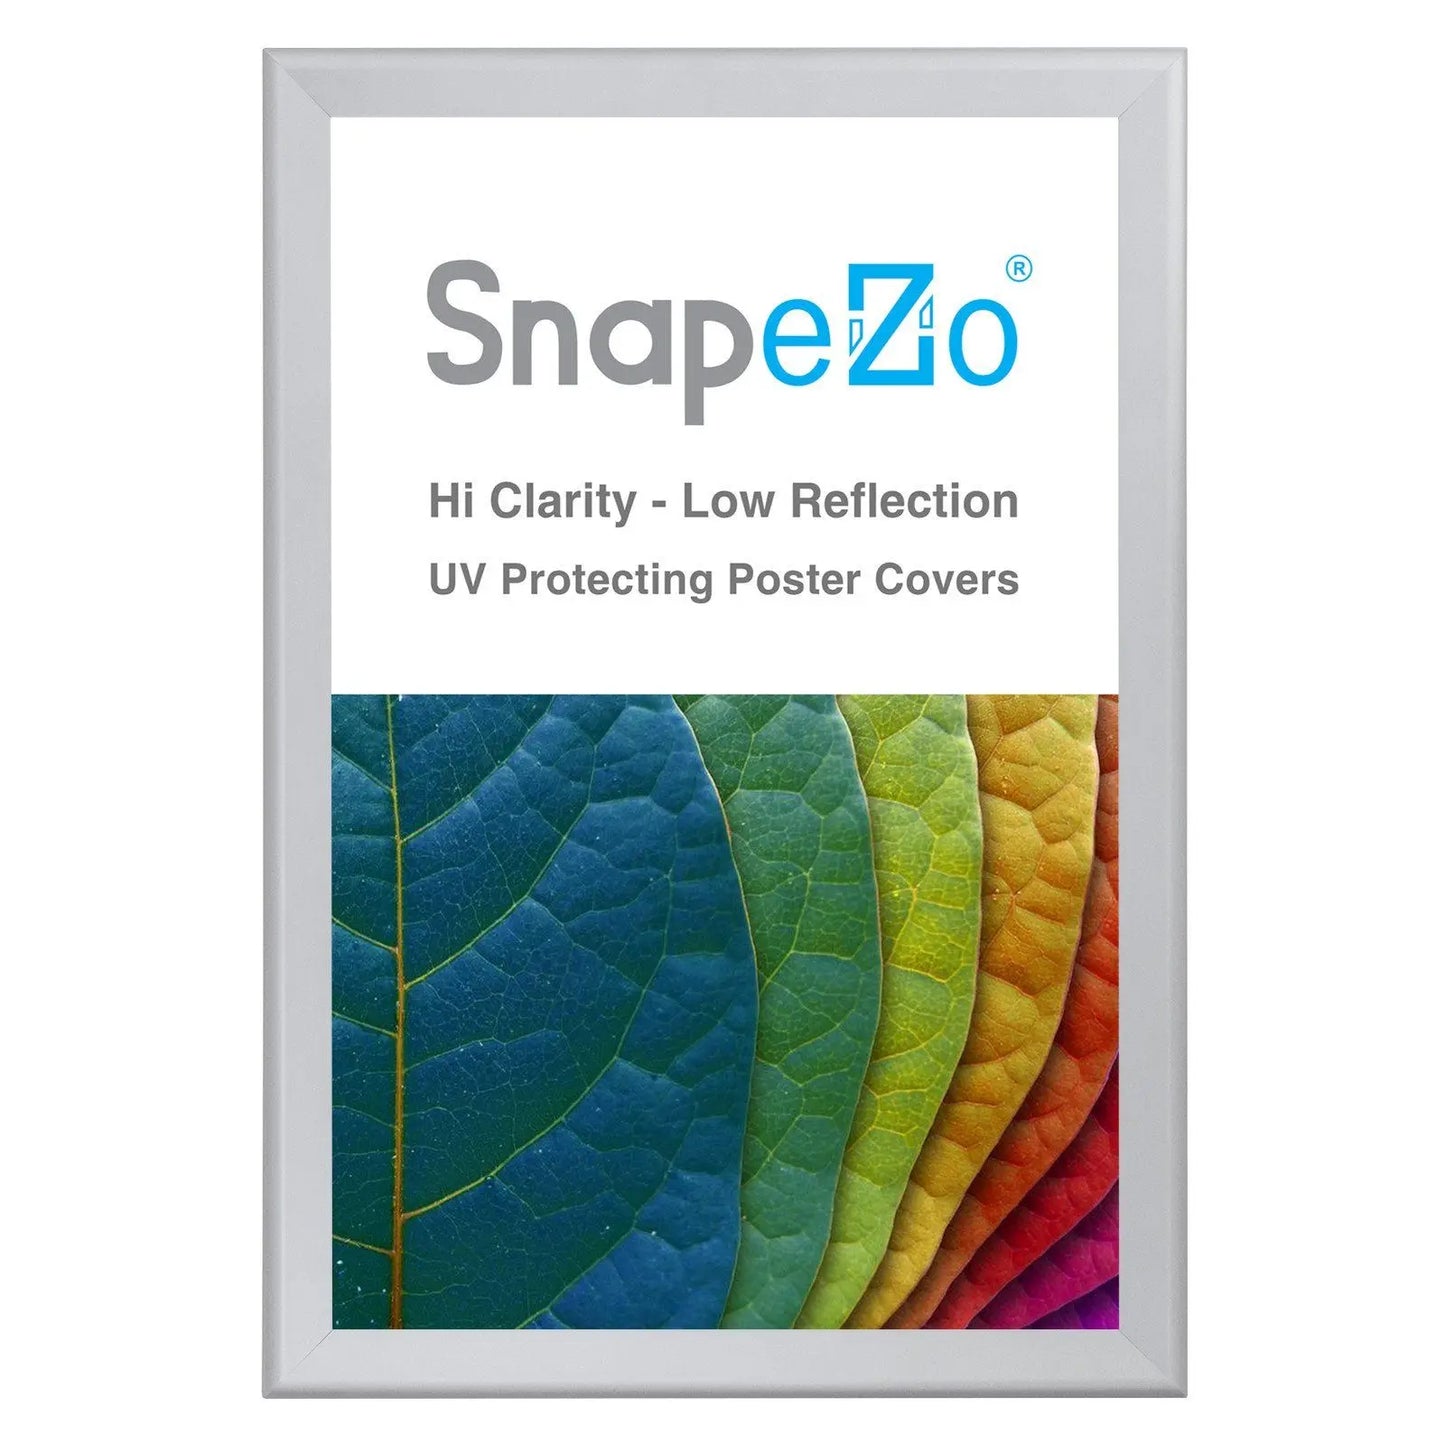 Silver snap frame poster size 24X36 - 1.4 inch profile - Snap Frames Direct